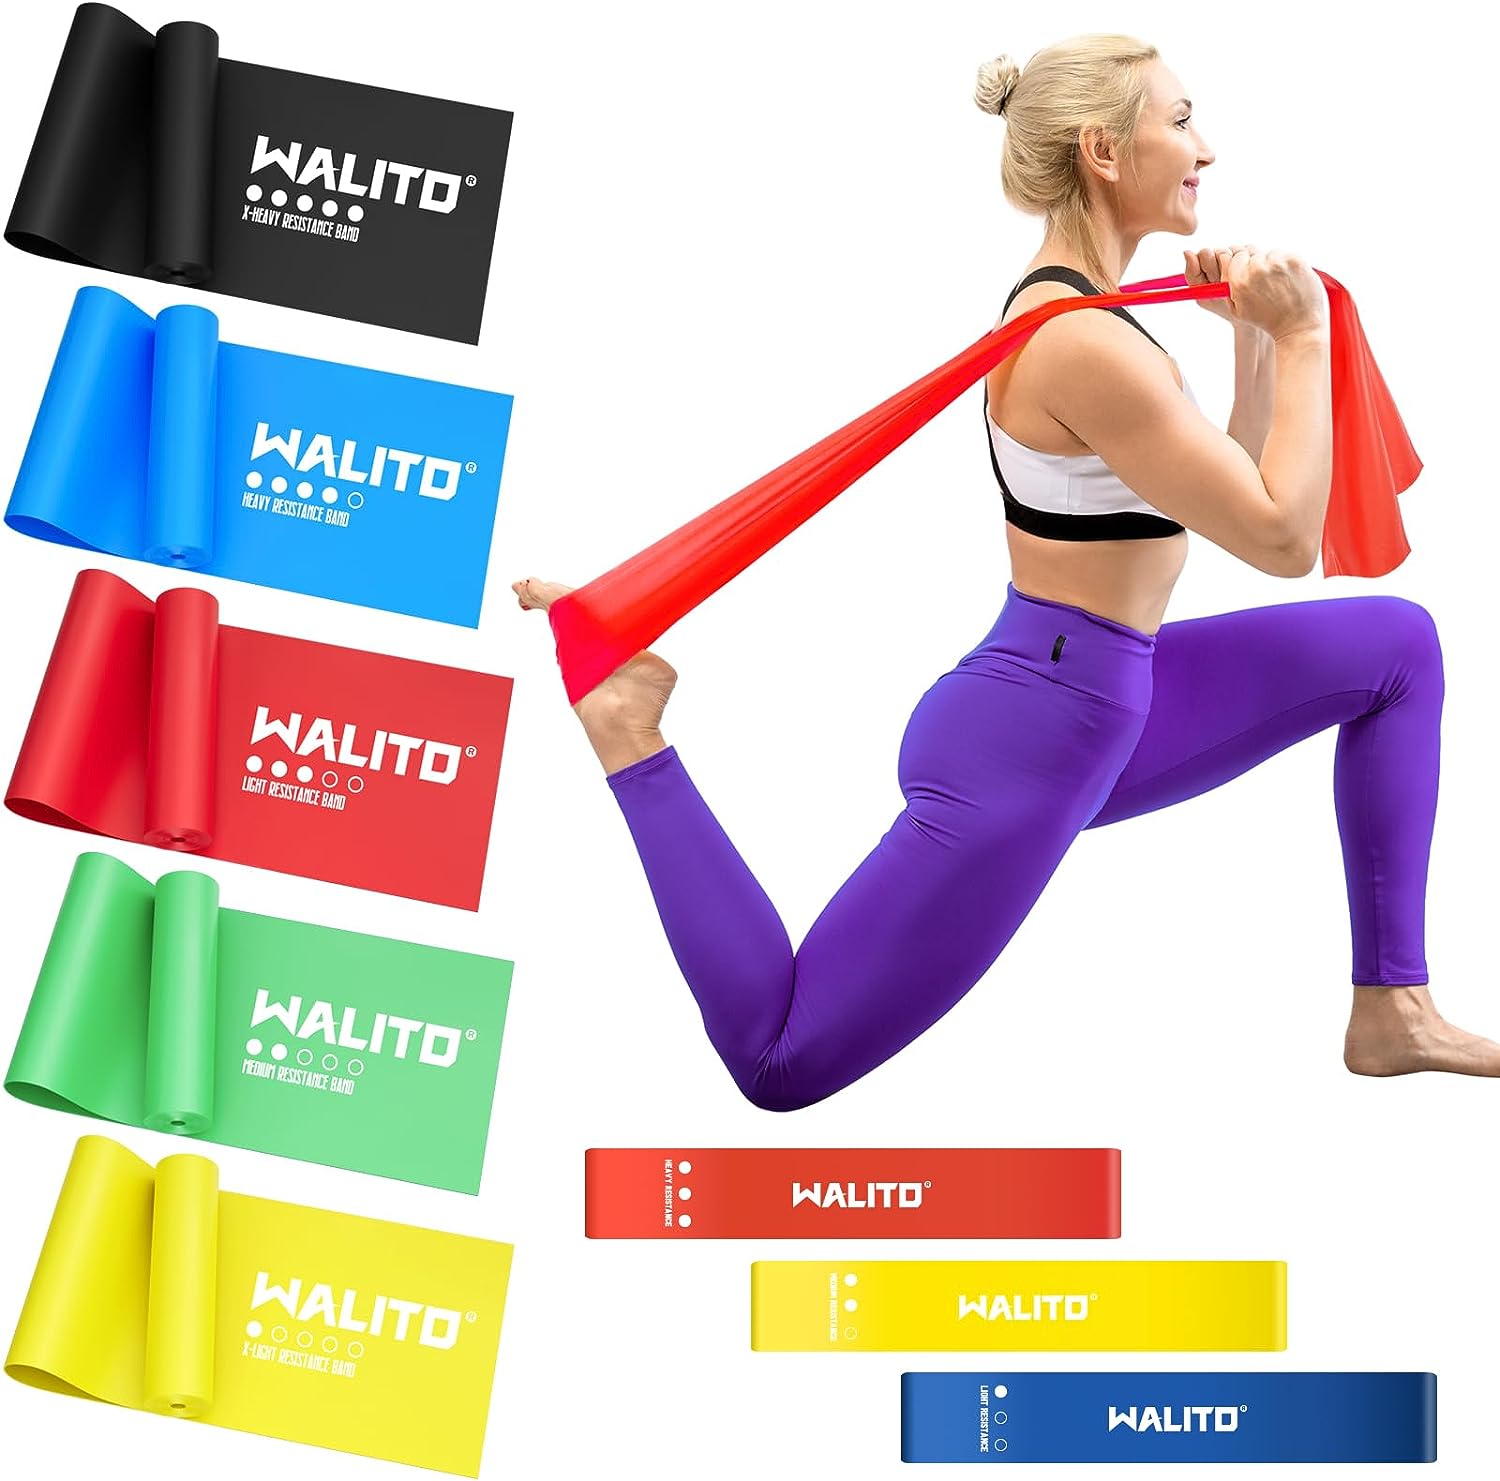 Walito Exercise Bands